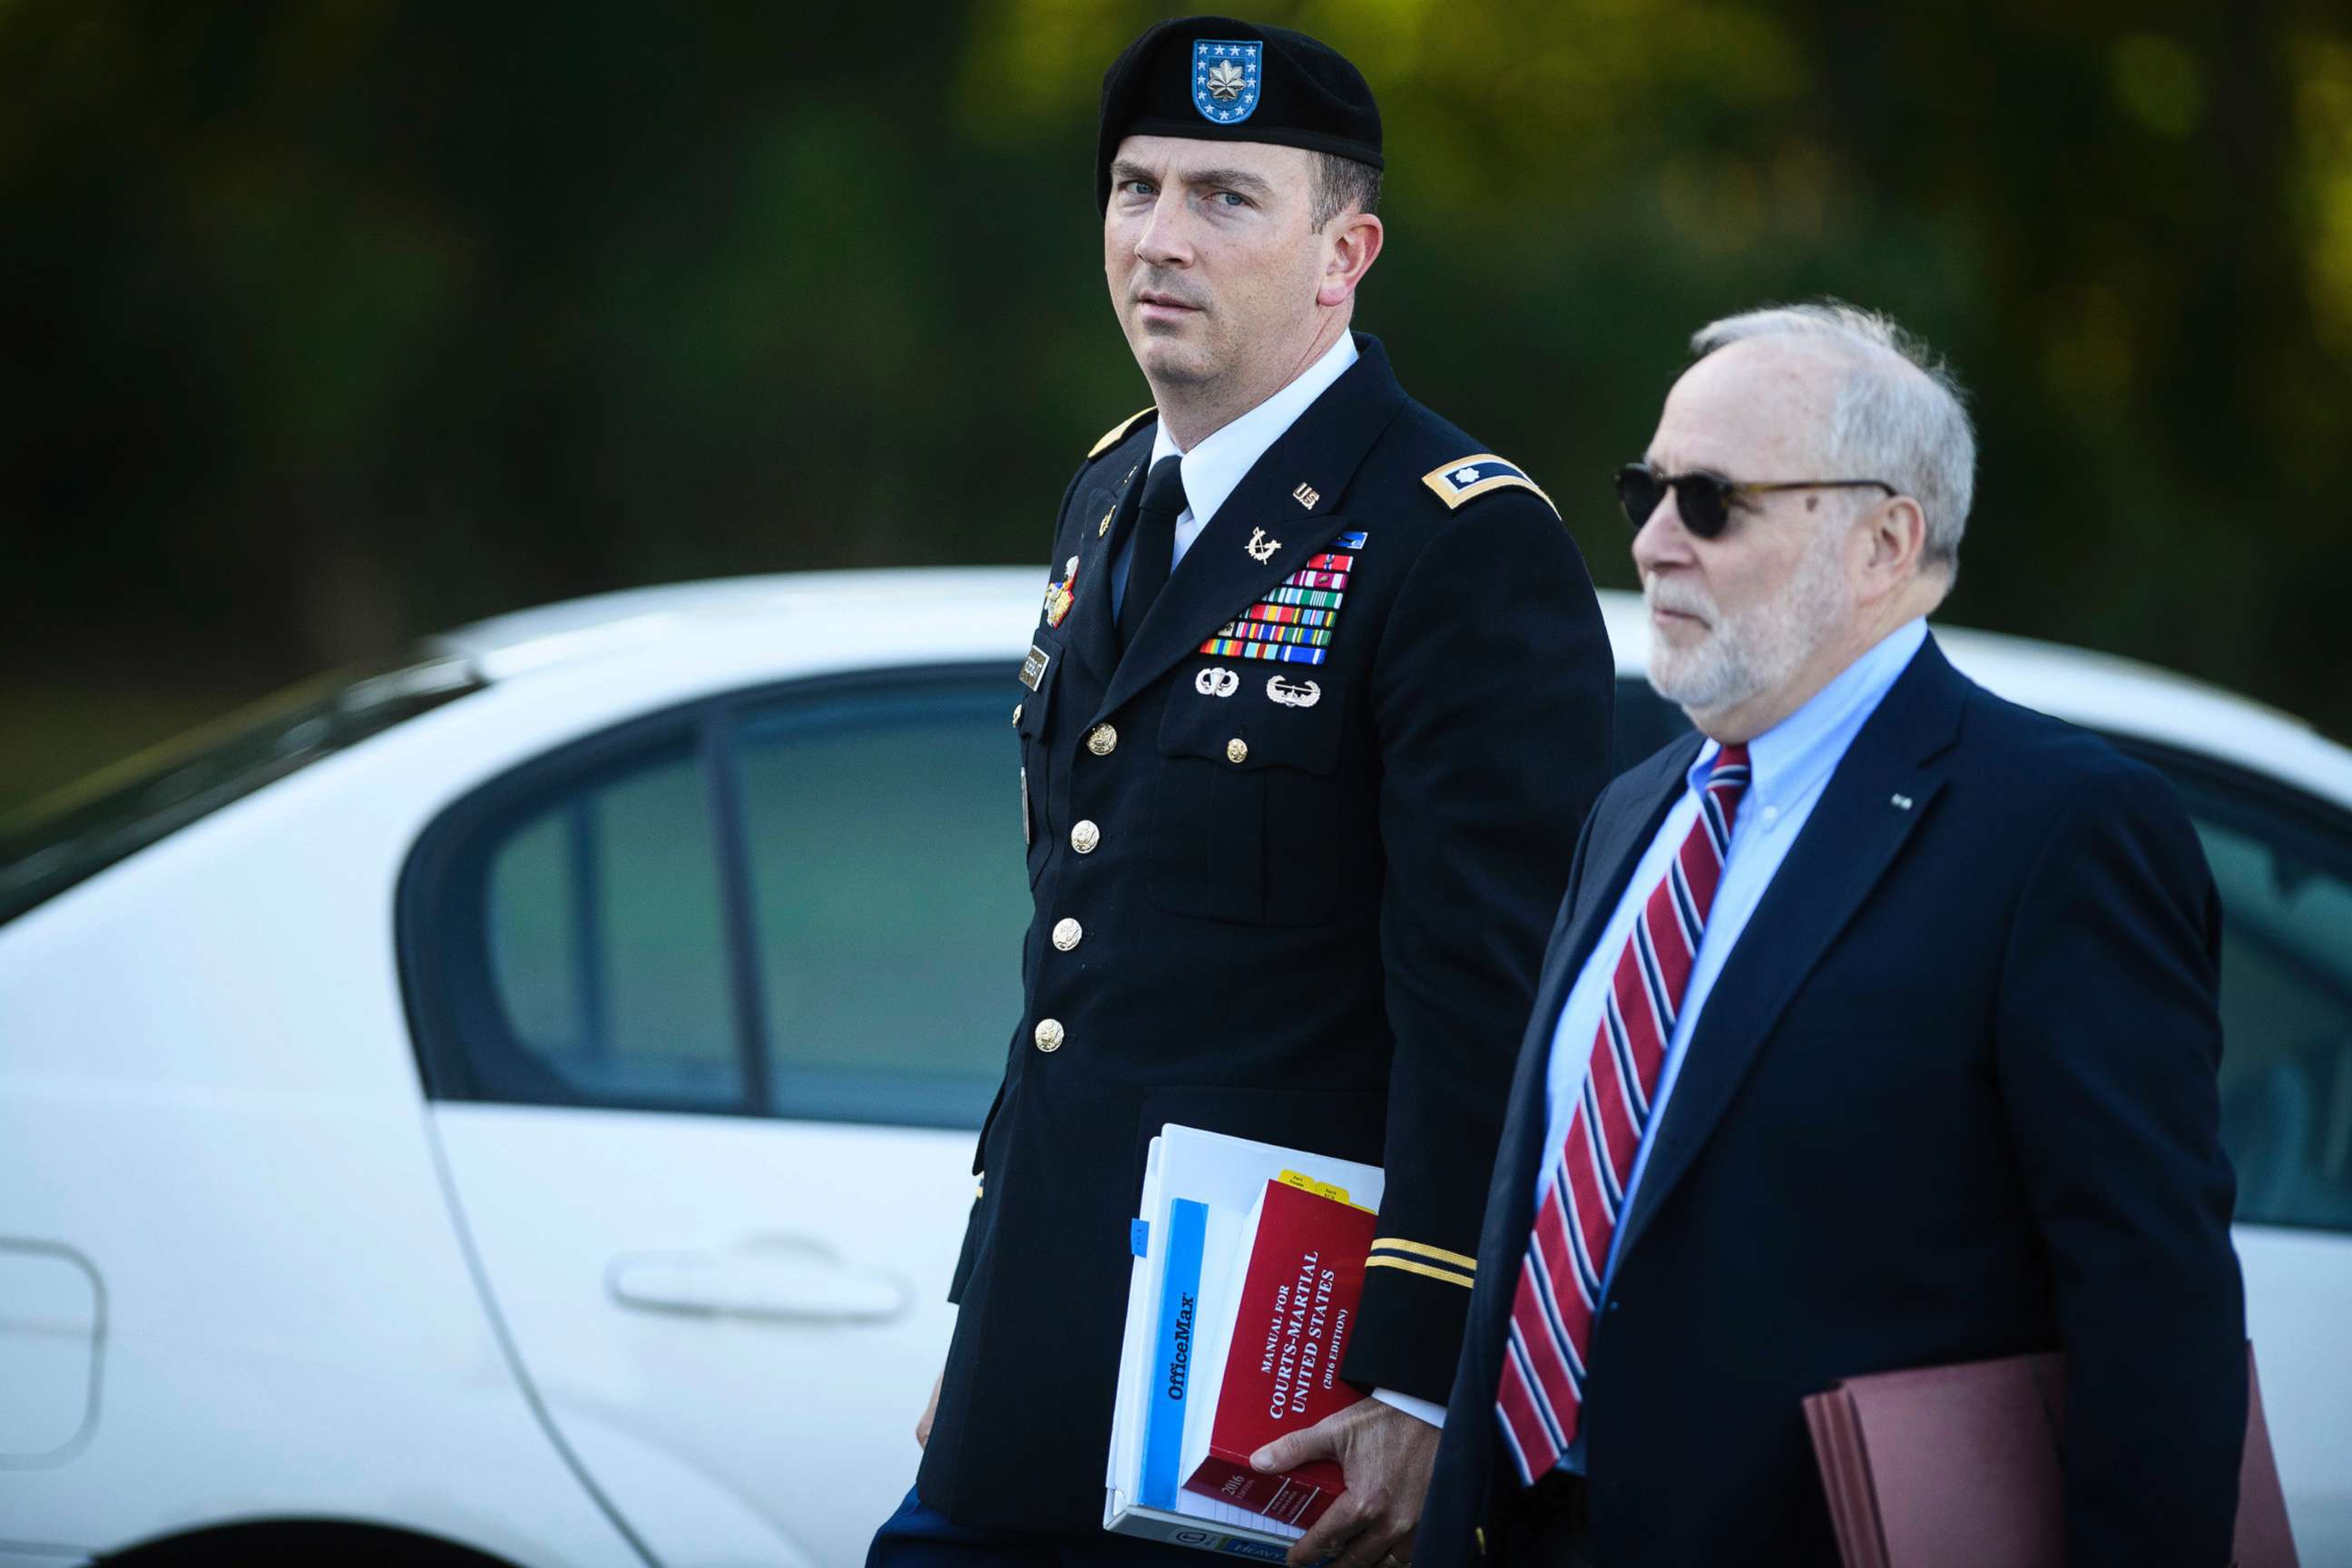 PHOTO: Sgt. Bowe Bergdahl's military attorney, Lt. Col. Franklin Rosenblatt, and his civilian attorney, Eugene Fidell, arrive at the Fort Bragg courthouse for a sentencing hearing on Wednesday, Oct. 25, 2017, on Fort Bragg, N.C.